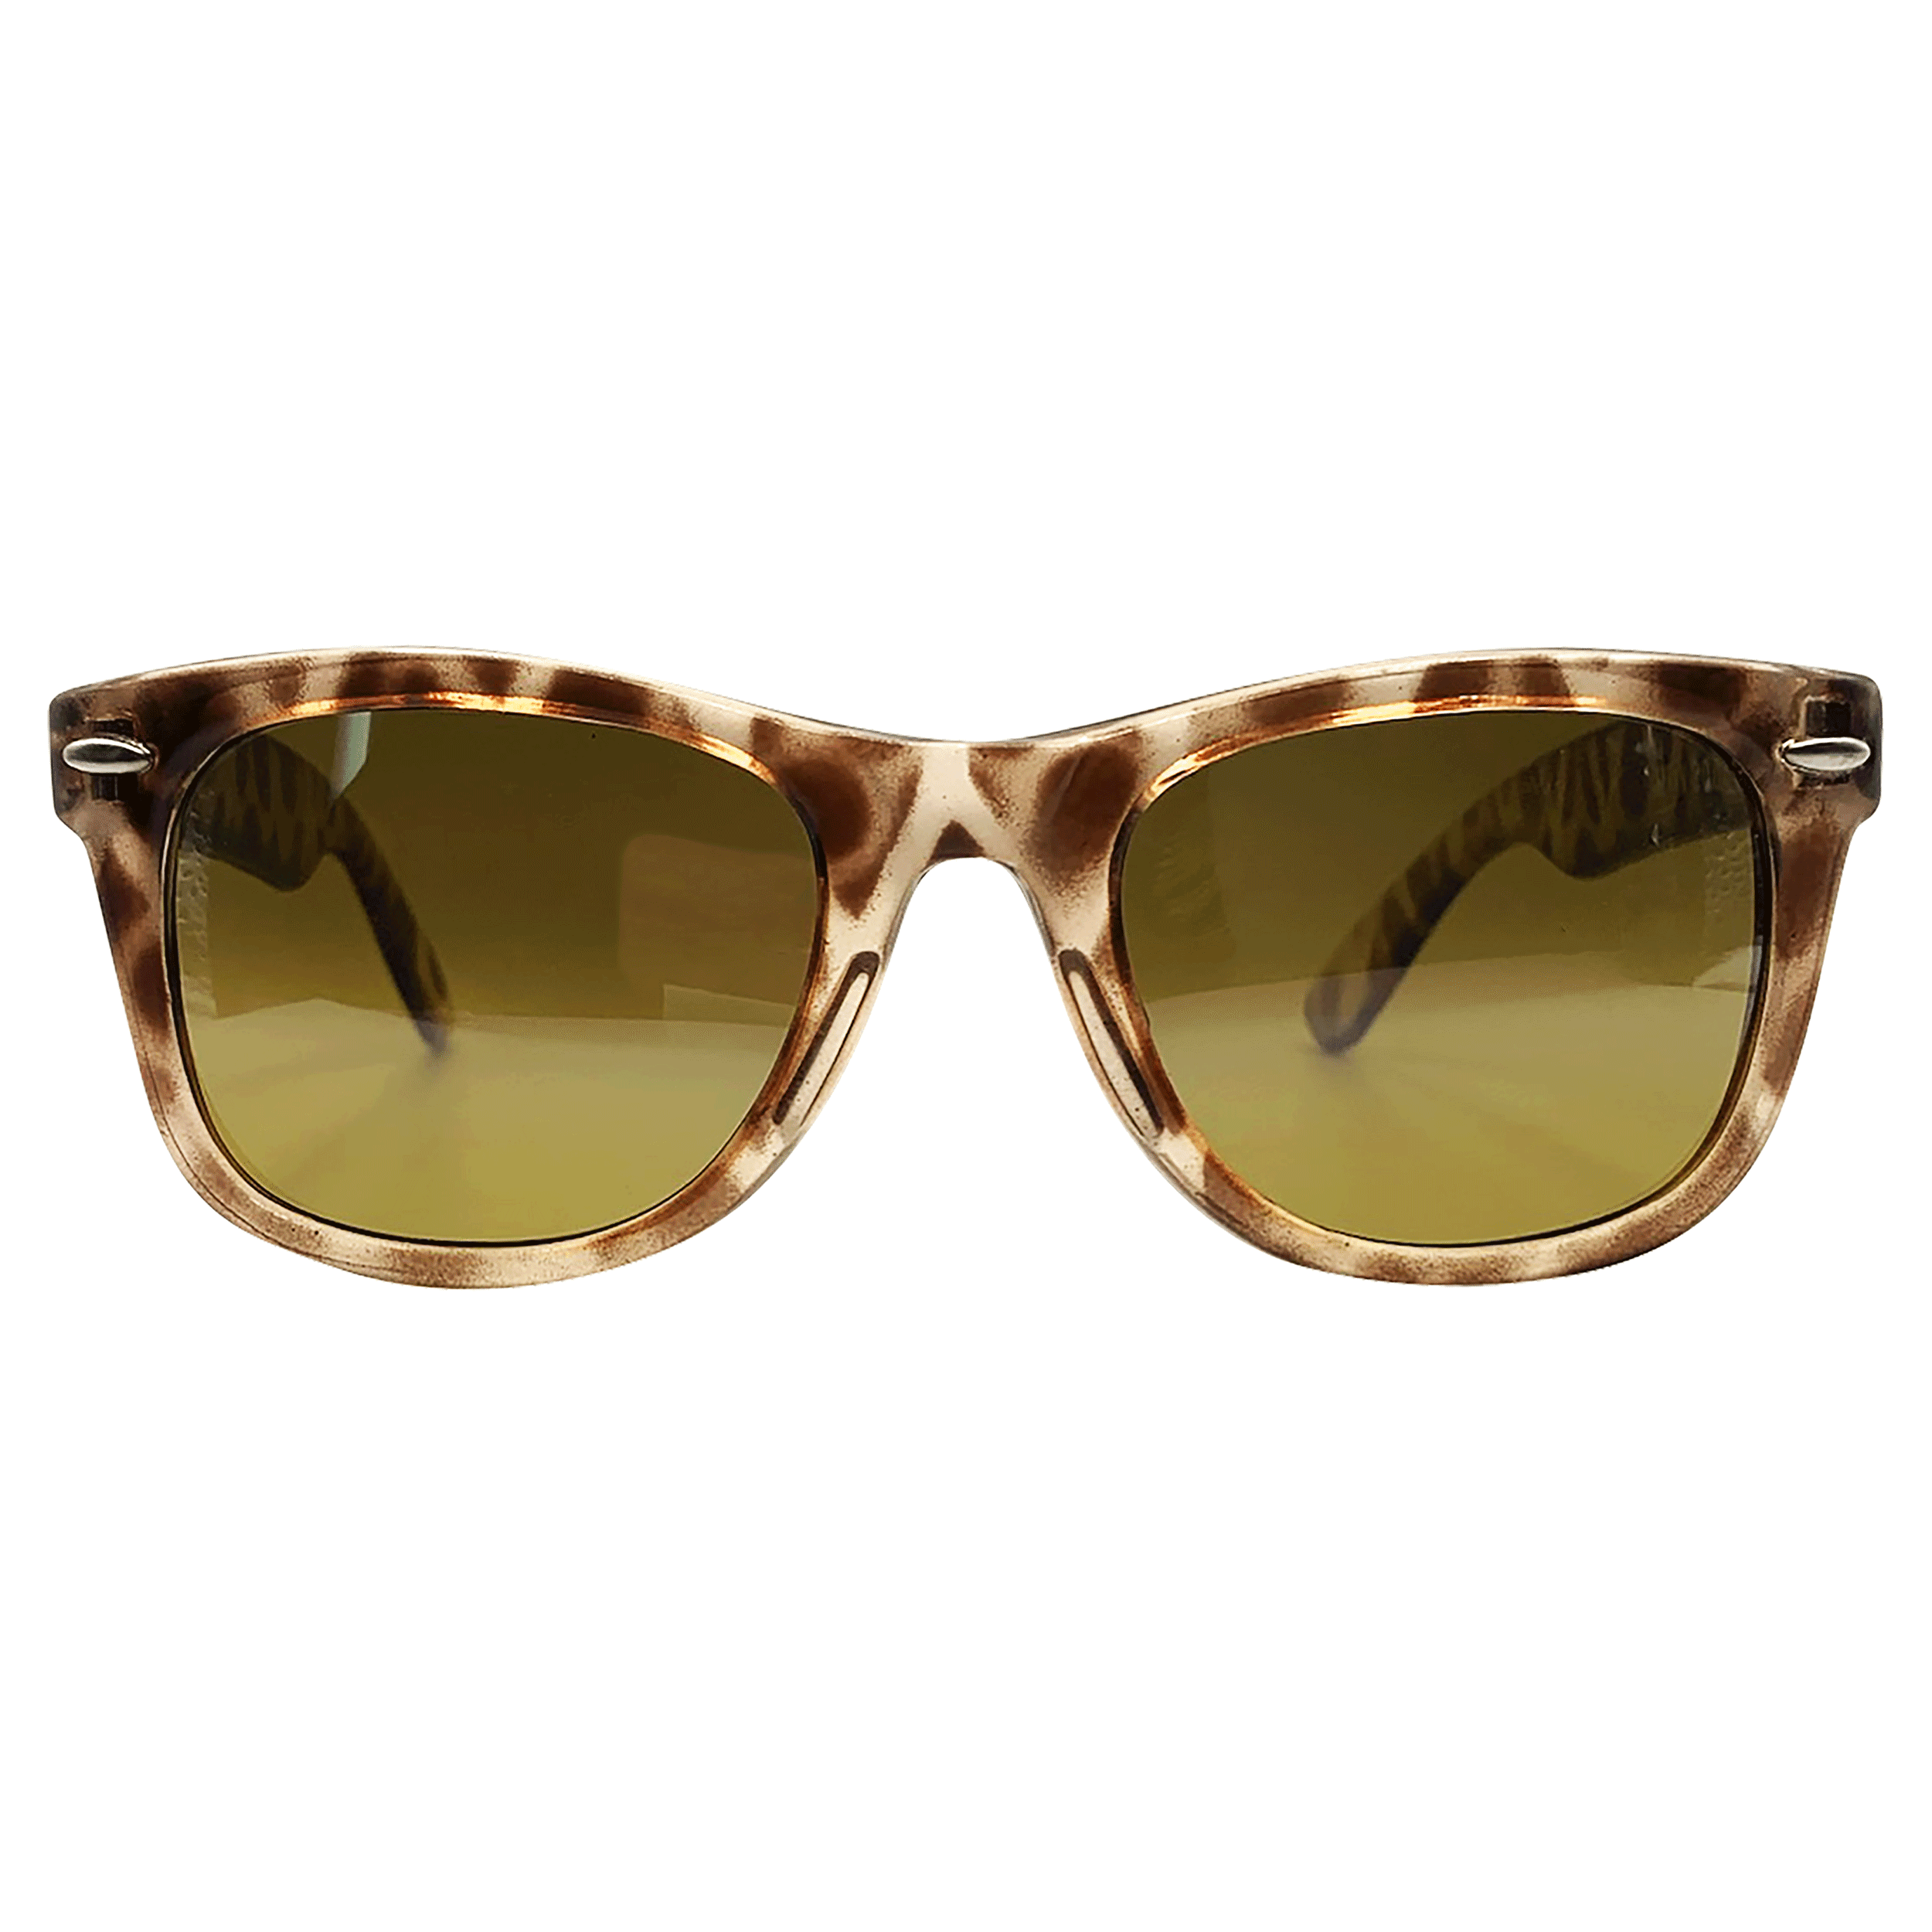 FIRST CLASS Classic 80s Vintage Sunglasses